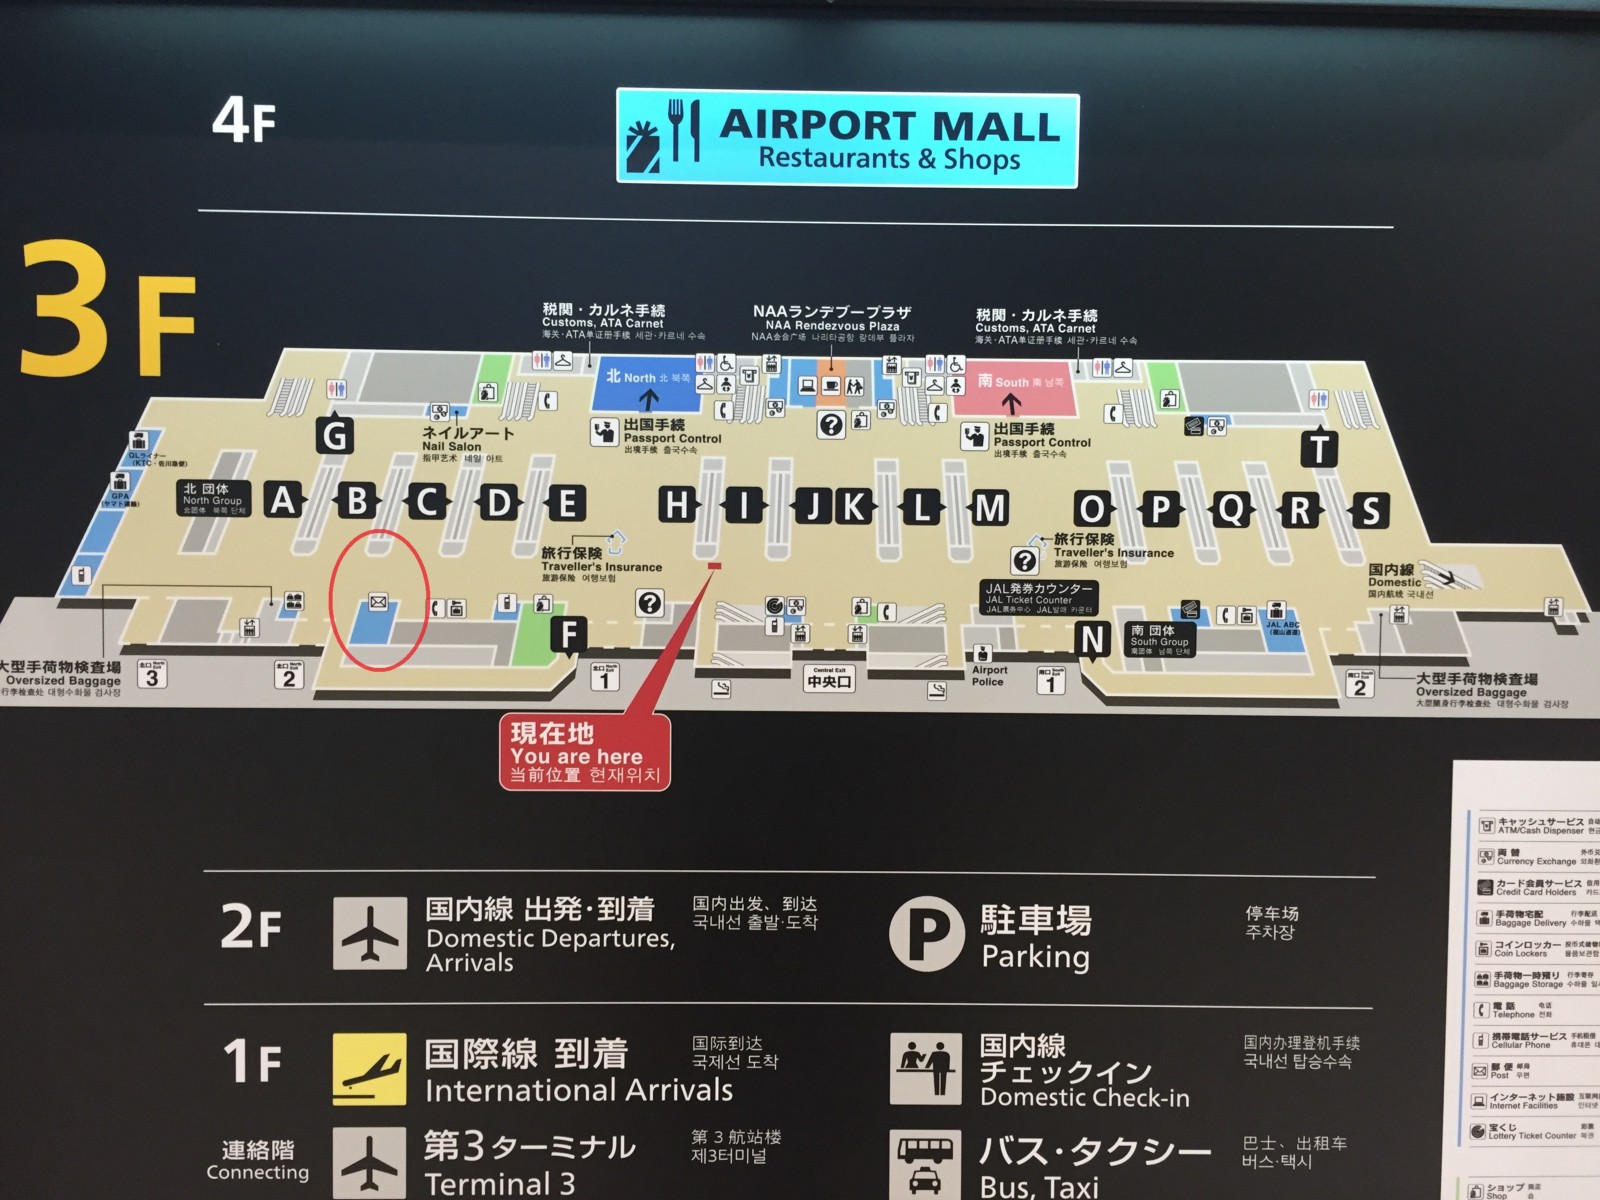 How To Reach At Narita Terminal 2 Post Office For Japan Wireless S Customers Jw Magazine Japan Web Magazine